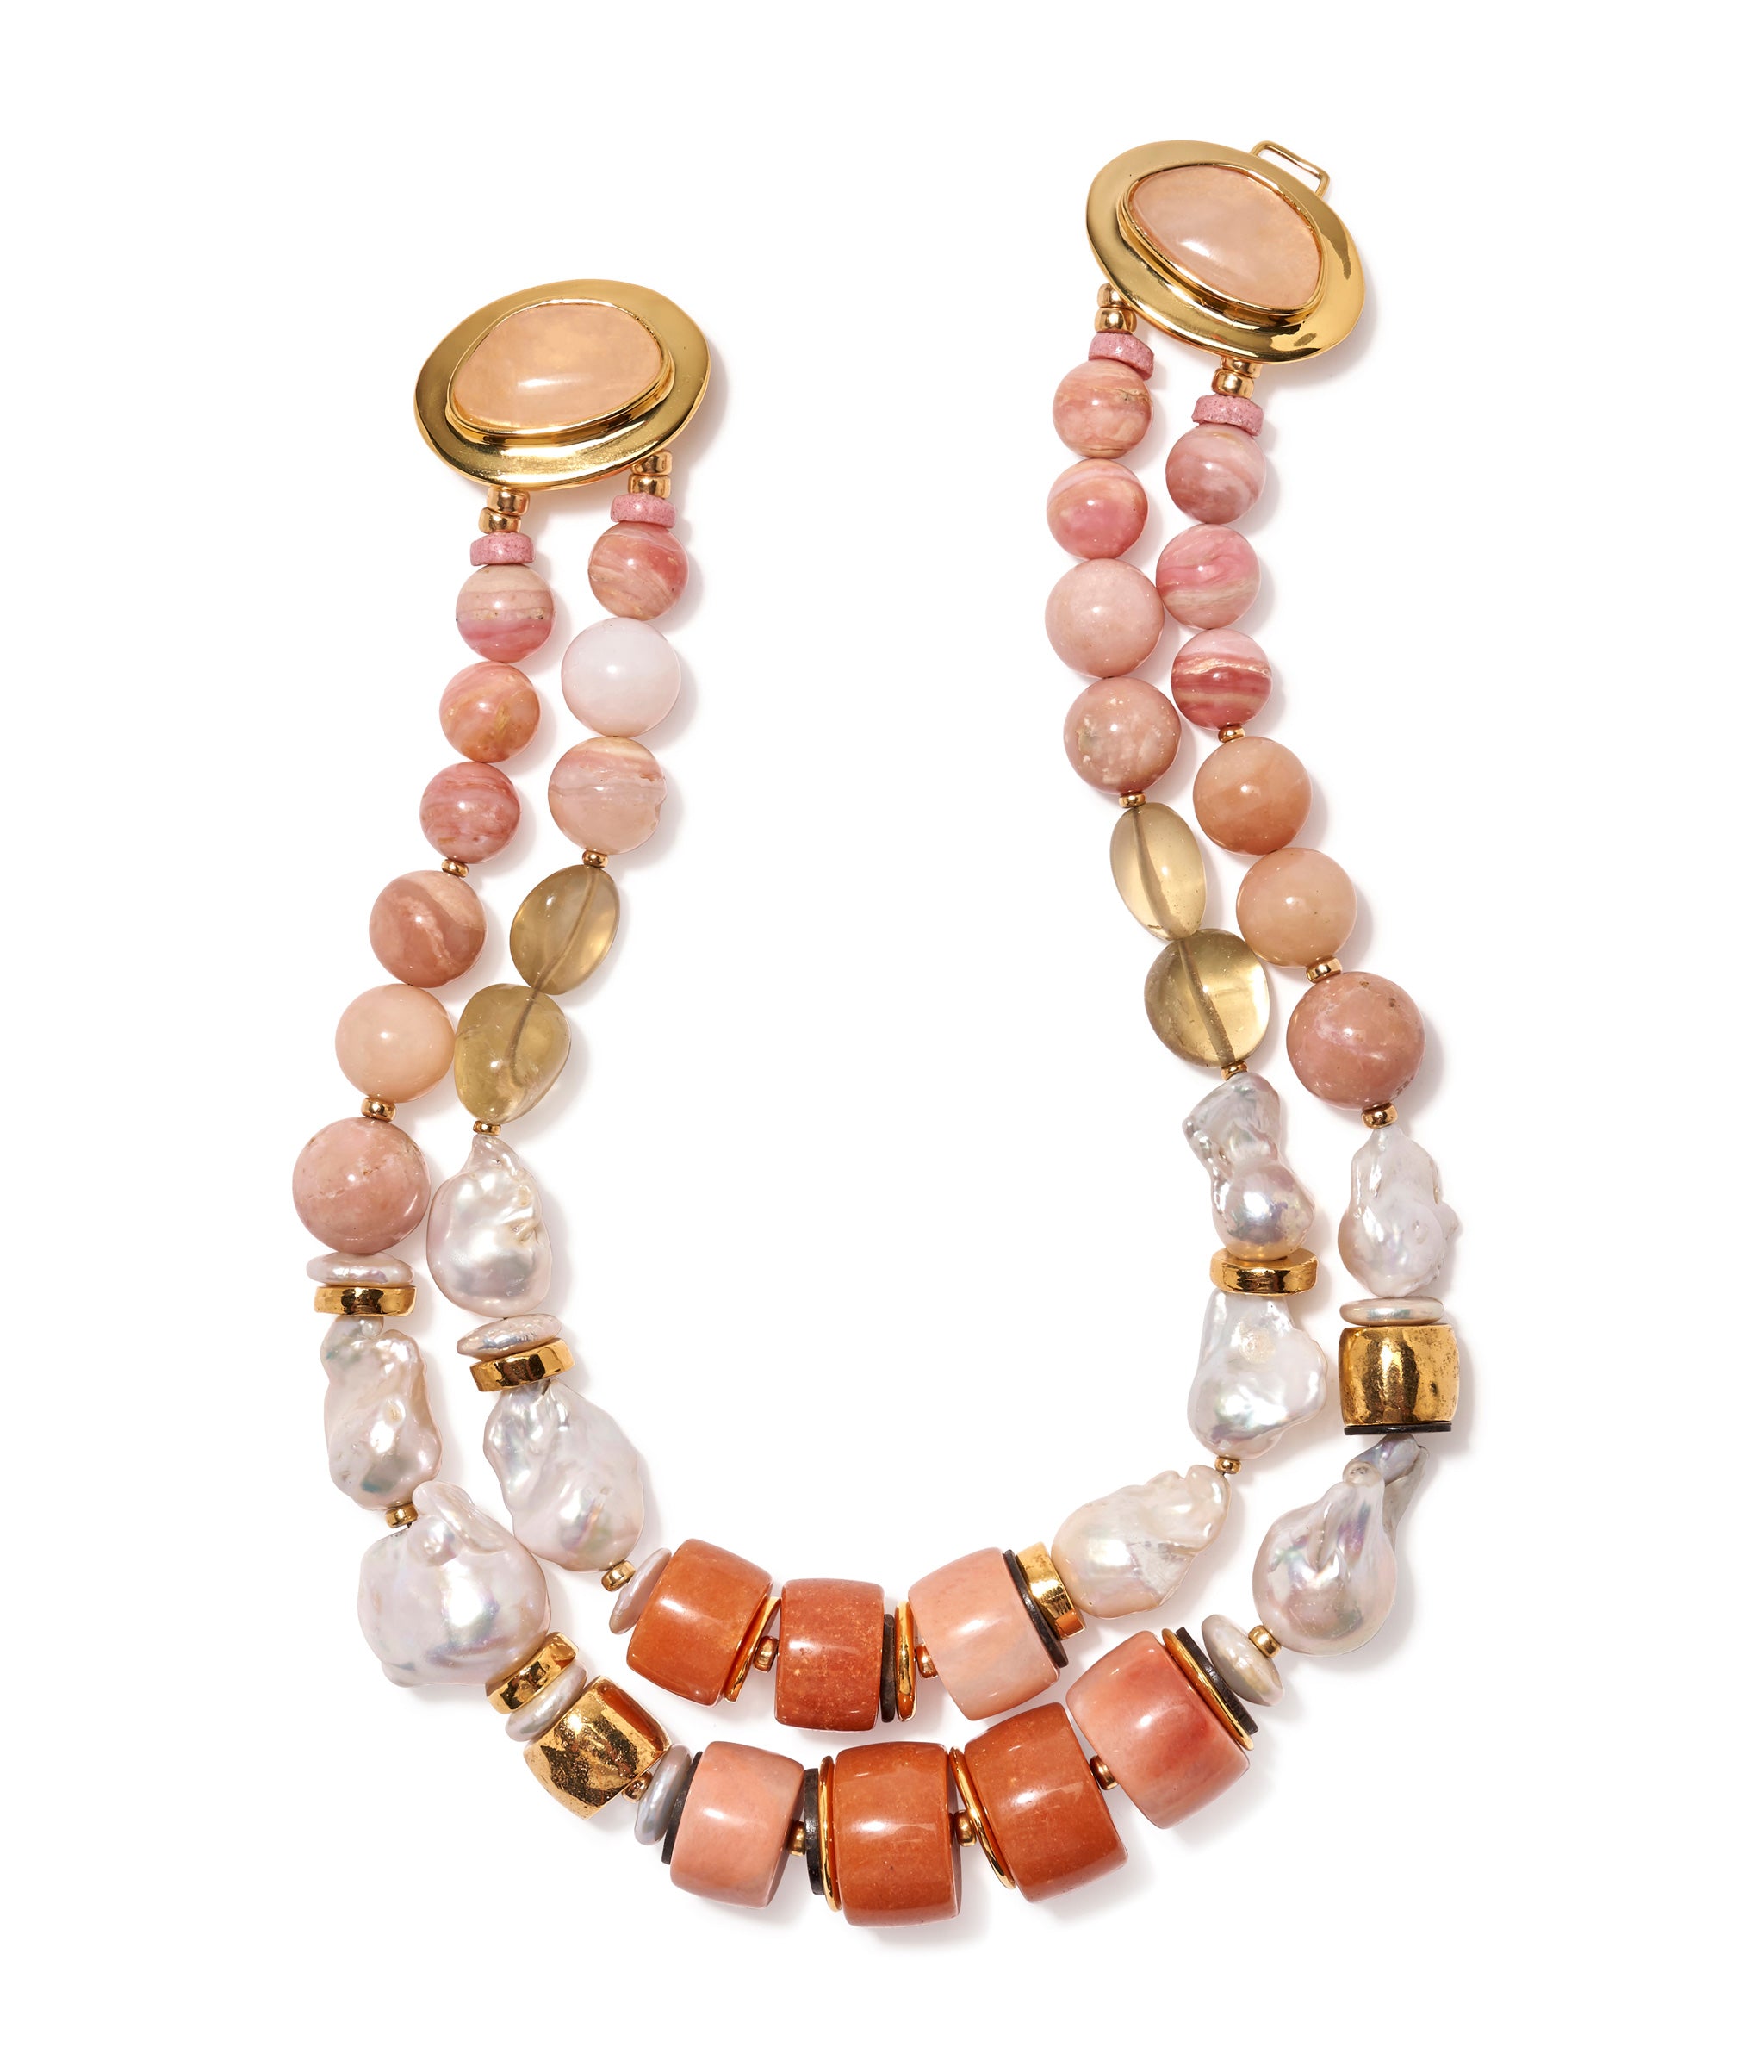 Ariel II Necklace. Gold-plated brass, pink opal, peark, peach and lemon quartz beads with a rose quartz stone closure.